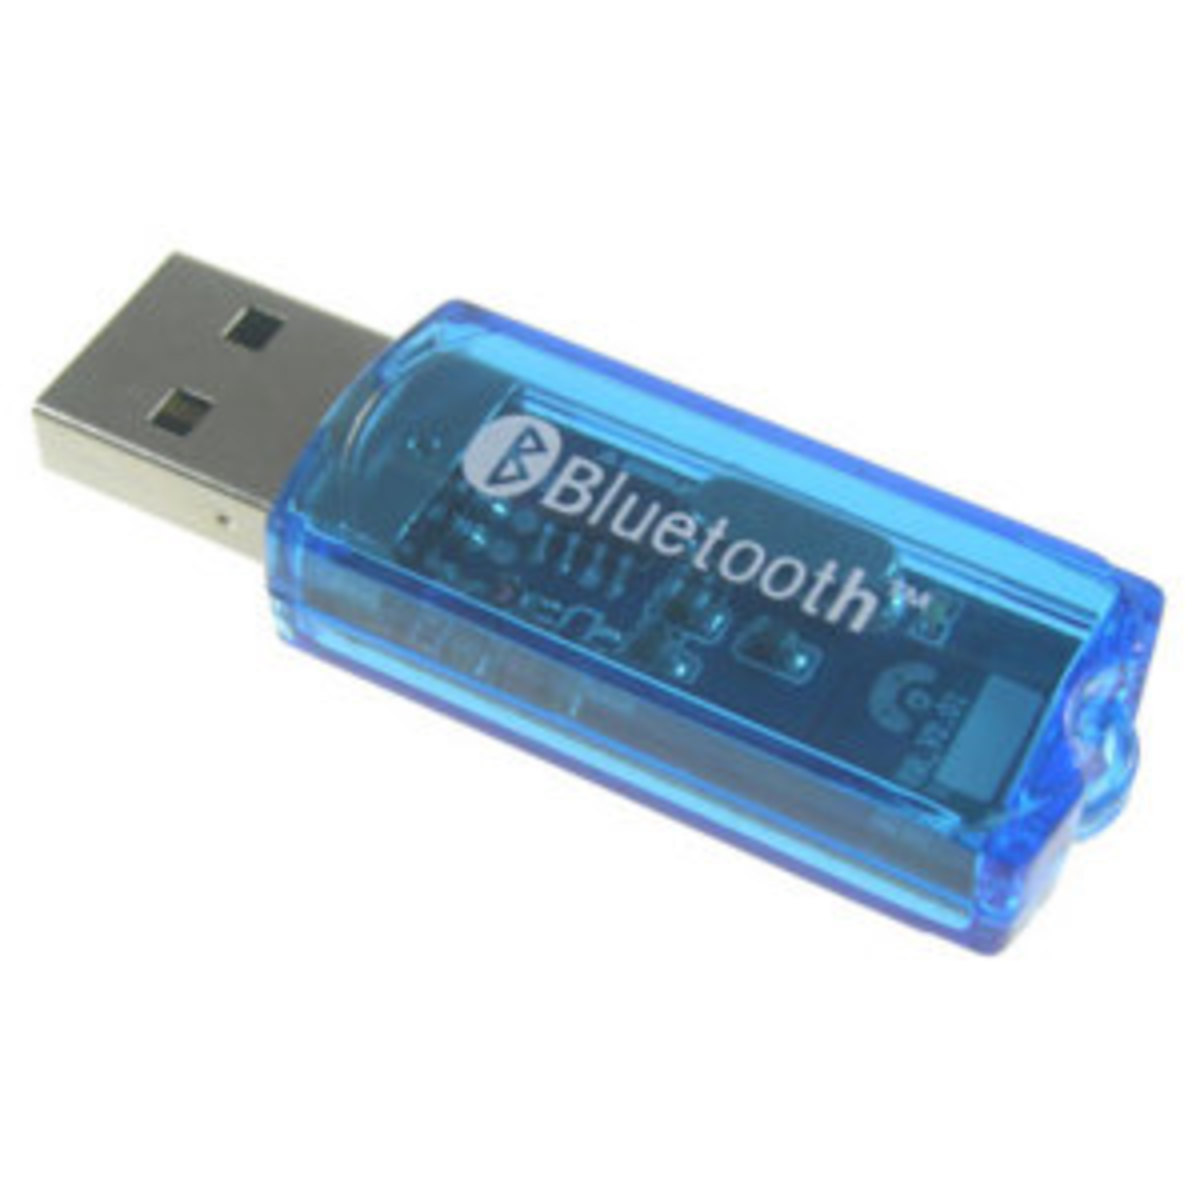 Bluetooth dongle is also used as data transferring device.